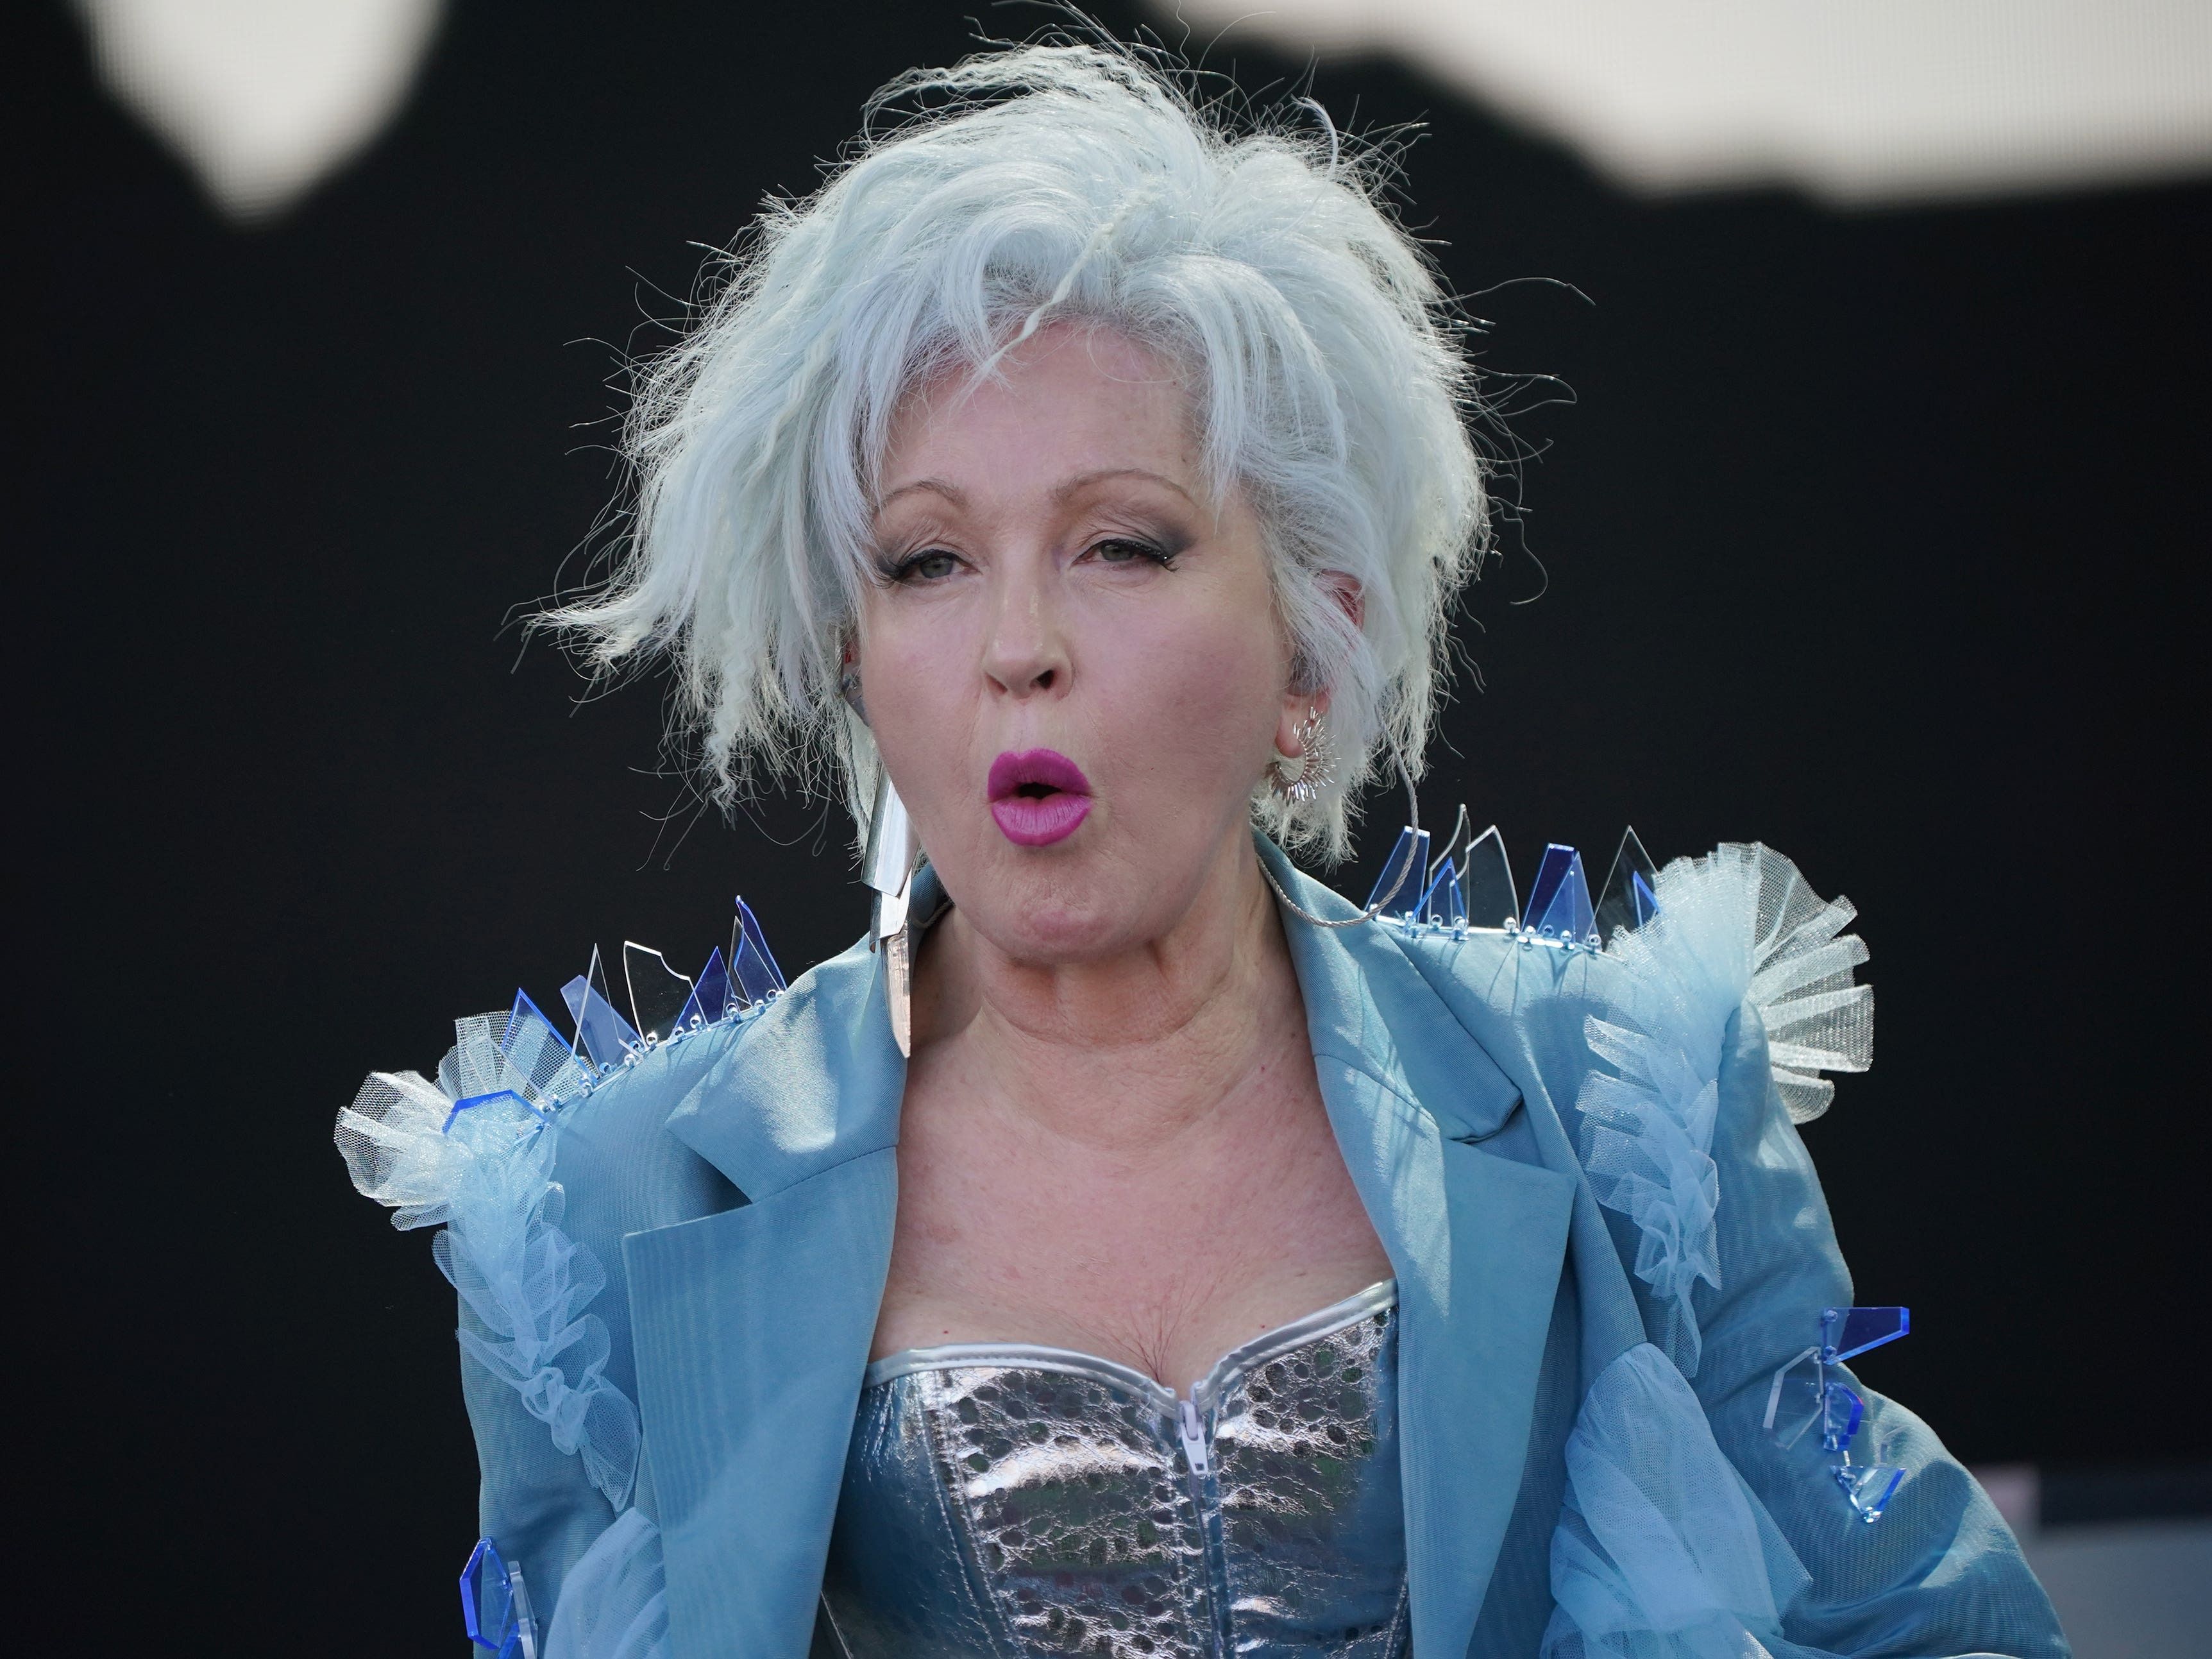 Cyndi Lauper responds to ‘technical difficulties’ during Glastonbury set